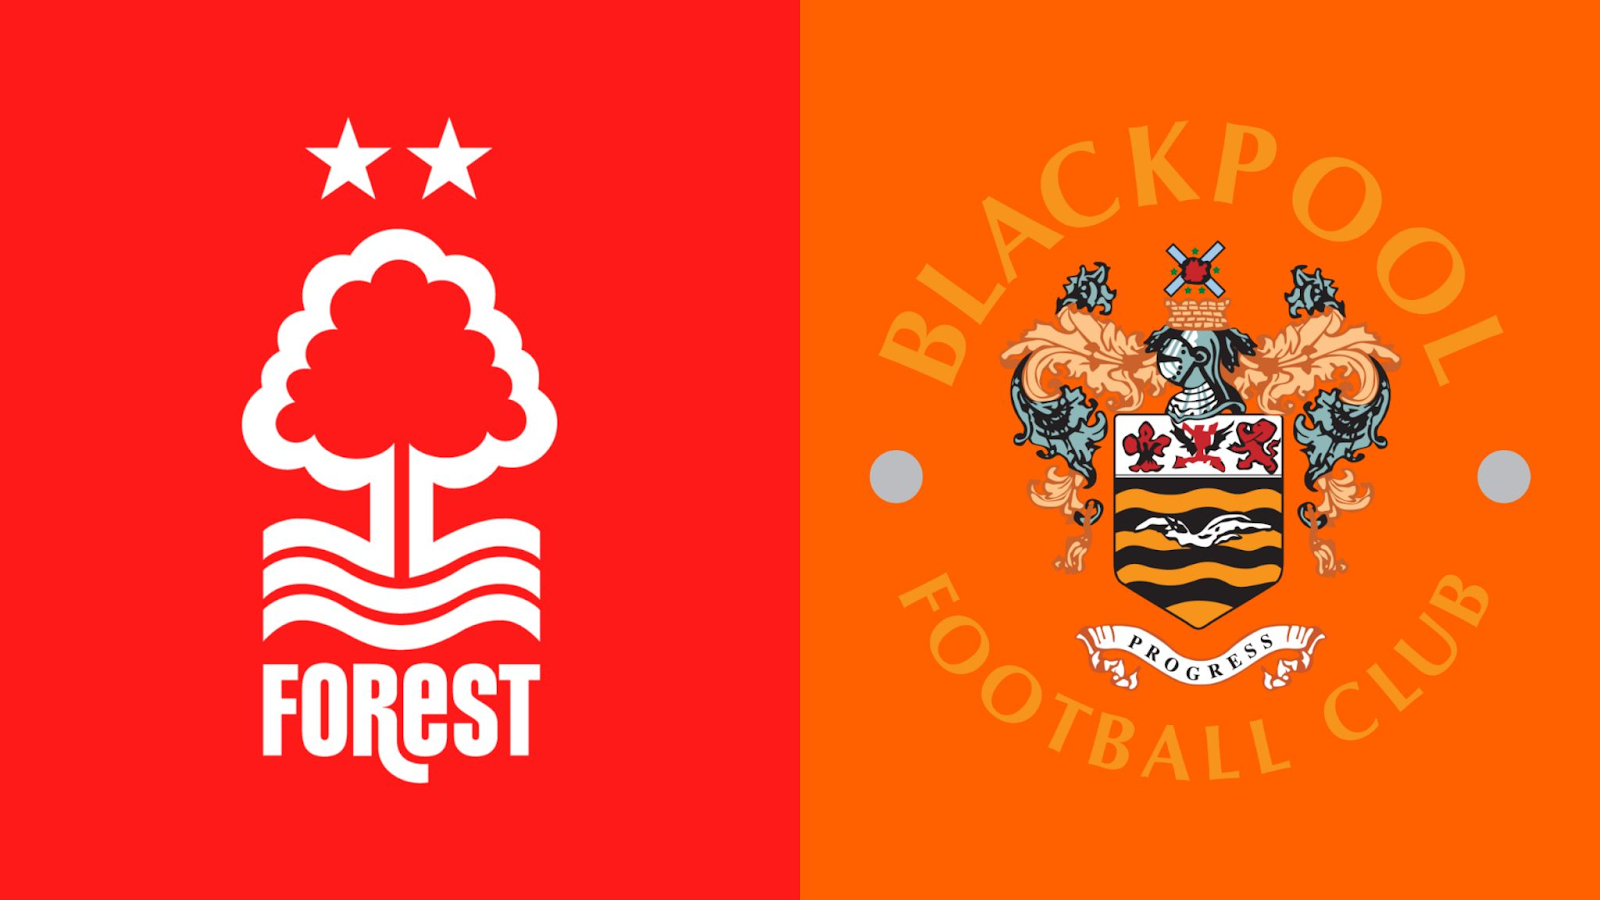 Nottingham Forest vs Blackpool A Clash of Styles